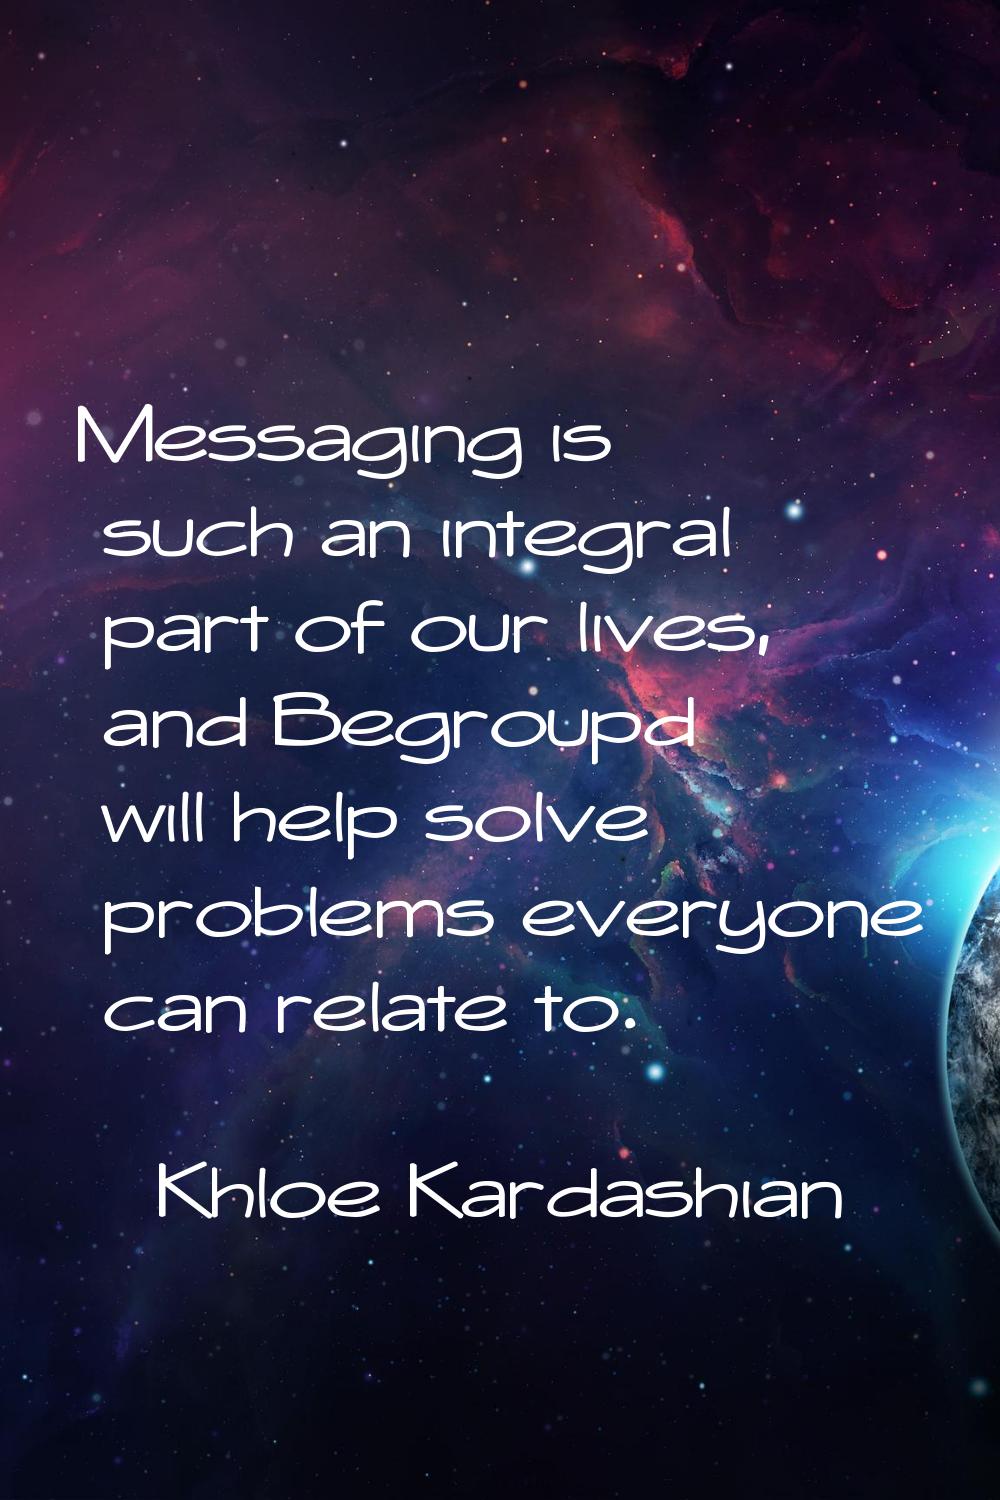 Messaging is such an integral part of our lives, and Begroupd will help solve problems everyone can